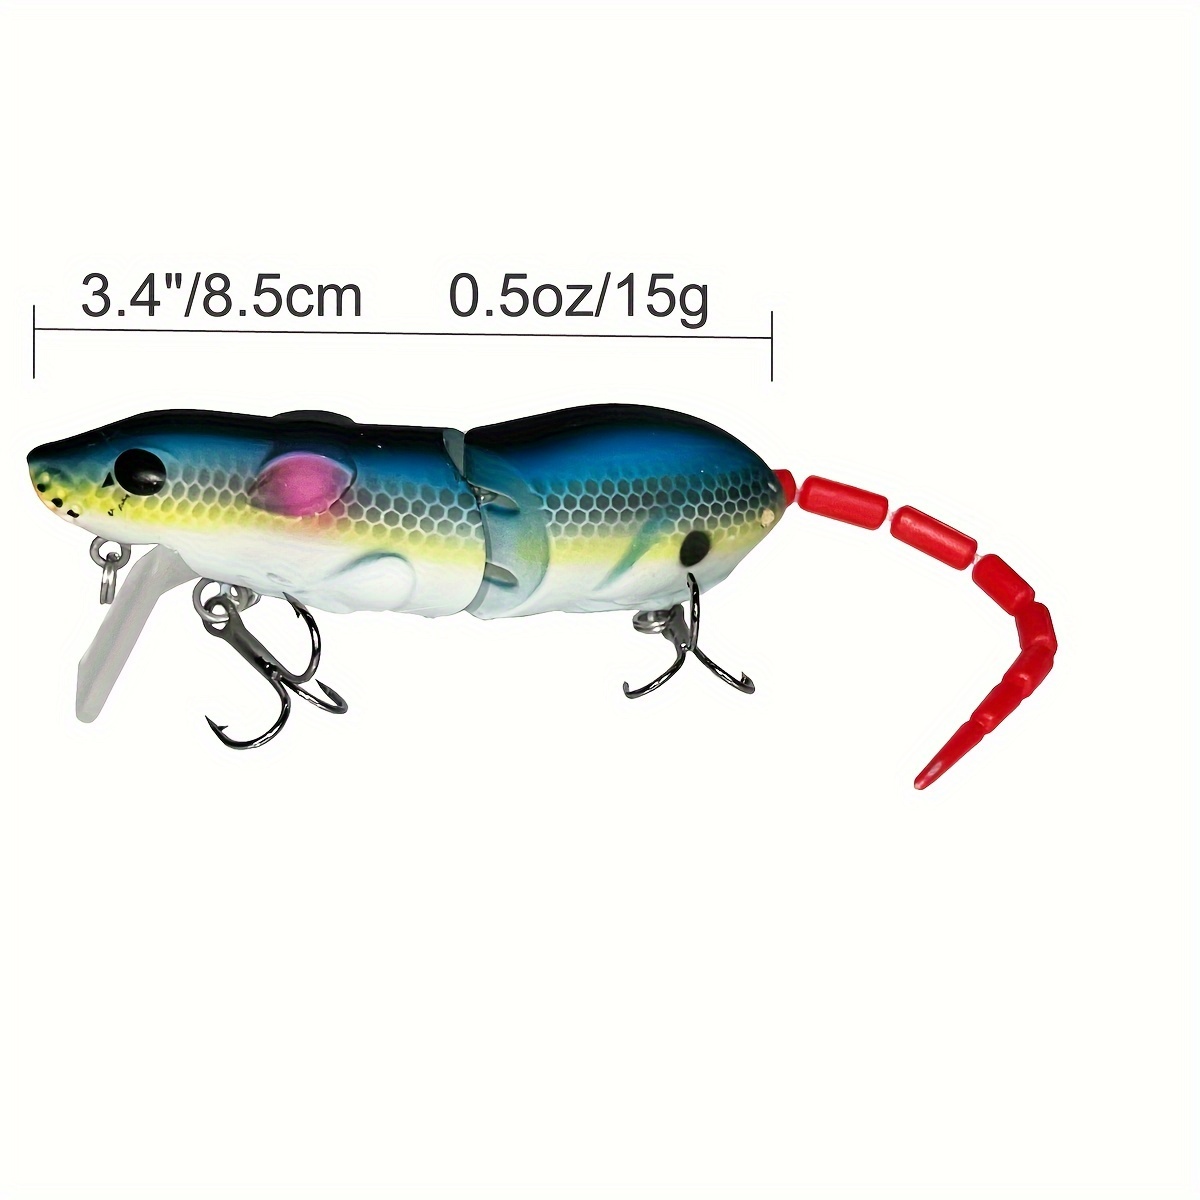 Buy fishing lures for freshwater bass Online in OMAN at Low Prices